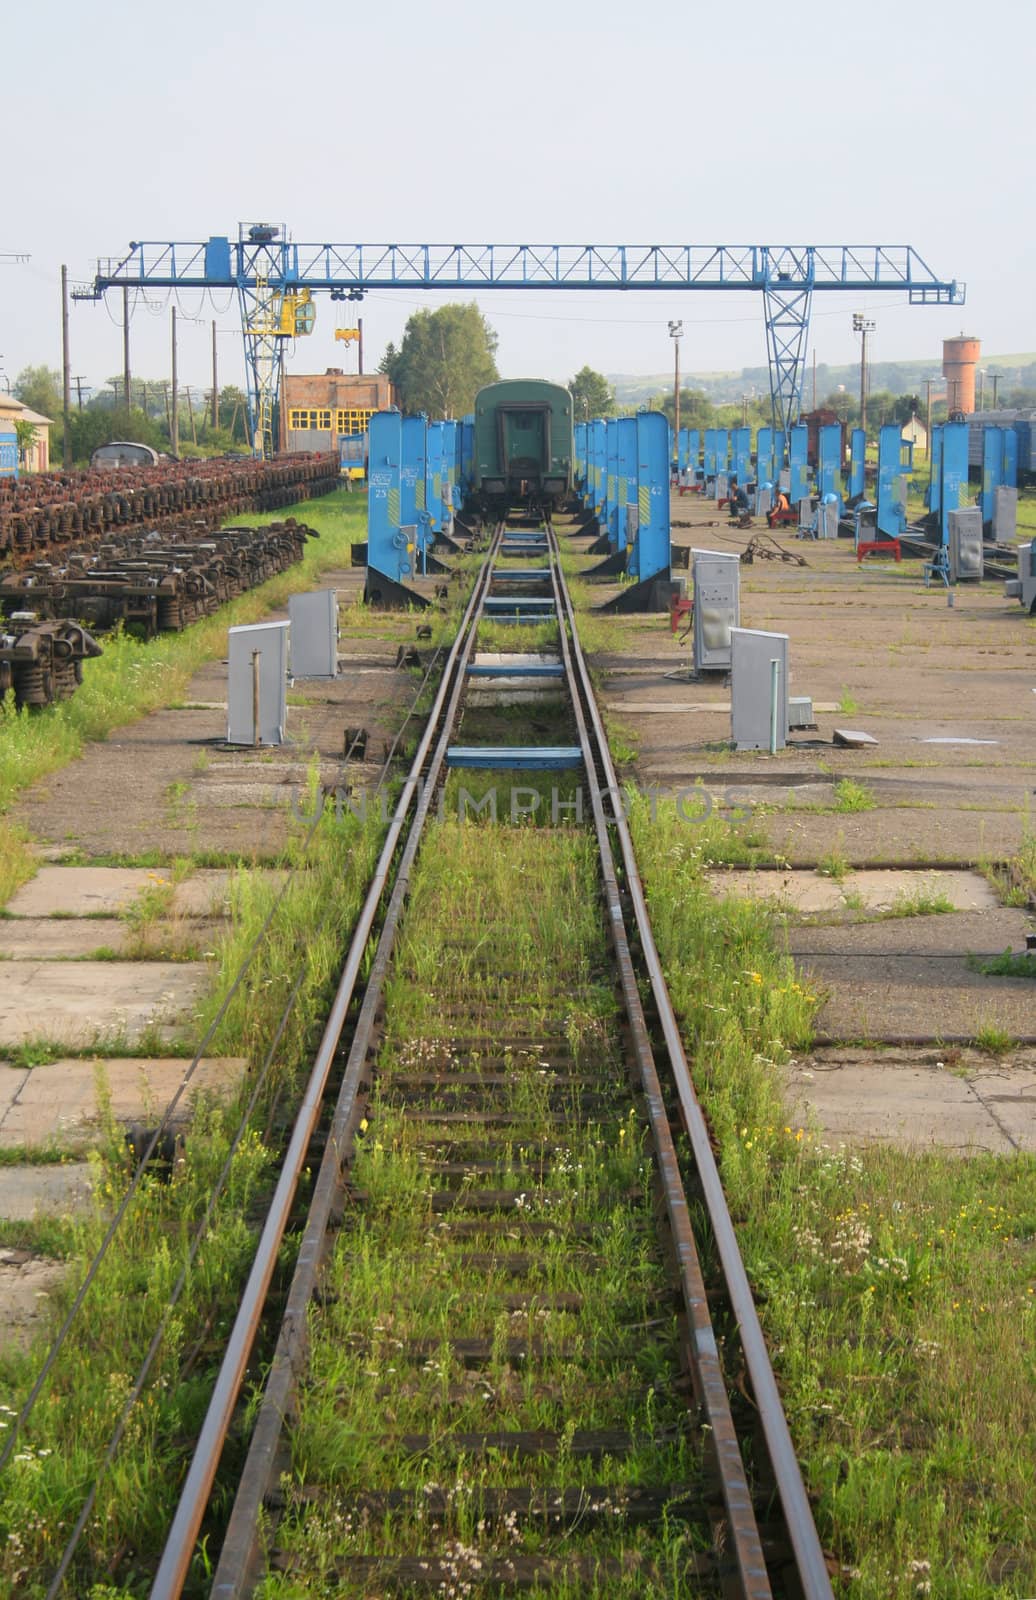 Eastern european train depot for changing wheels on carriages